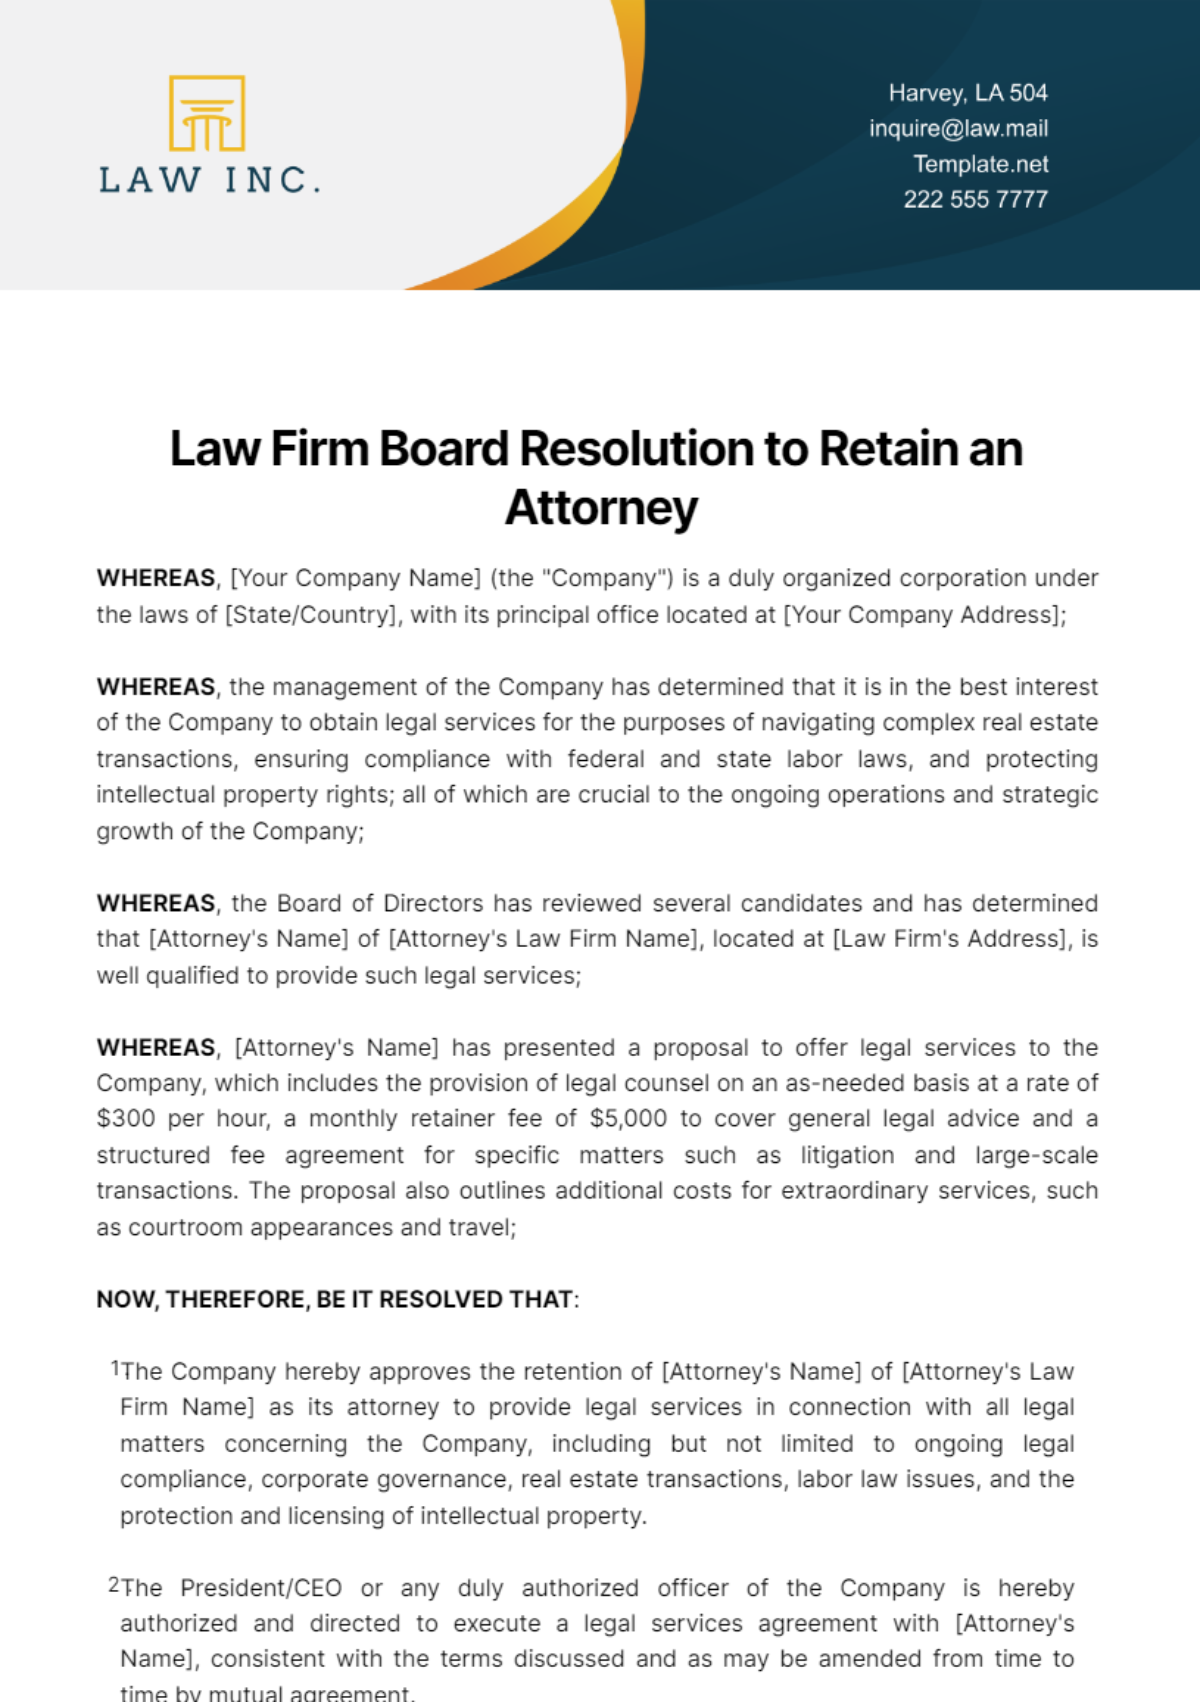 Law Firm Board Resolution to Retain an Attorney Template